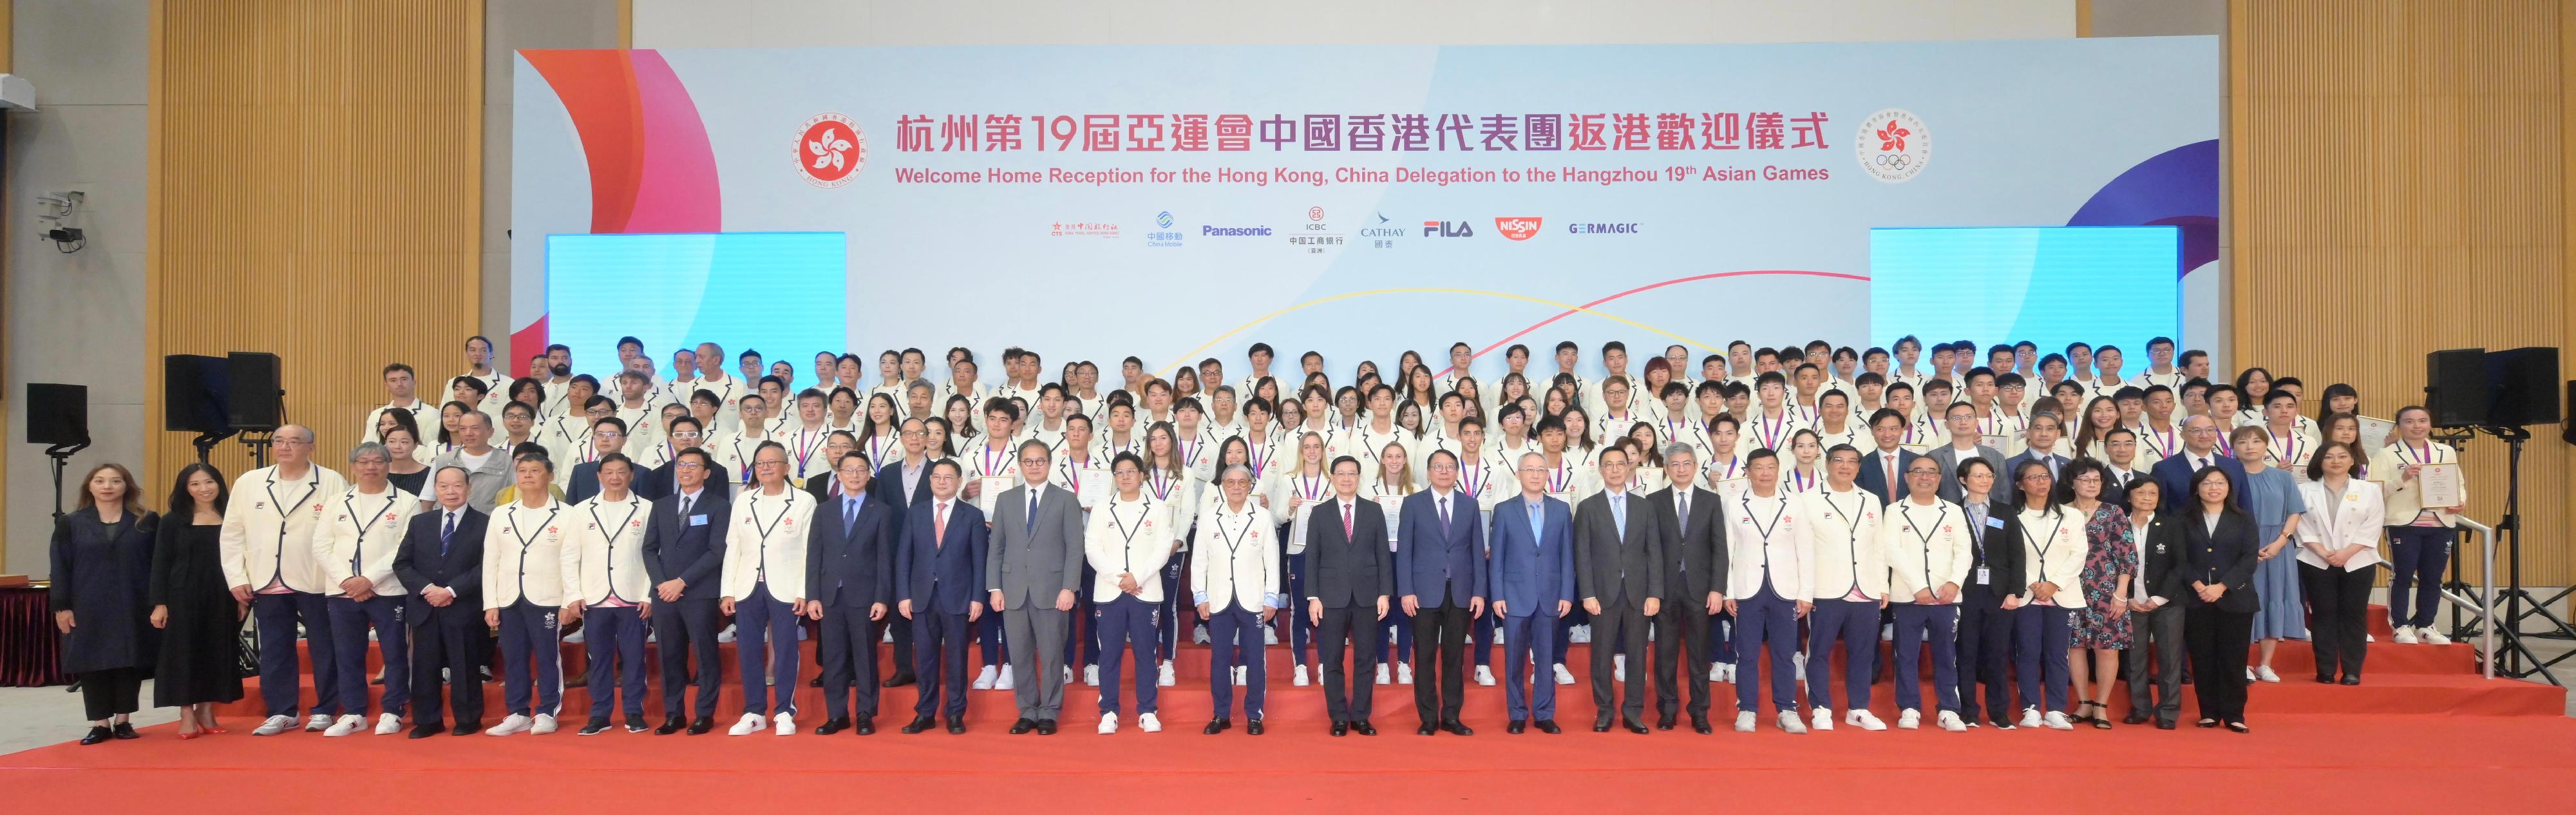 The Chief Executive, Mr John Lee, attended the welcome home reception for the Hong Kong, China Delegation to the 19th Asian Games Hangzhou today (October 14). Photo shows (front row, from eighth left) the Commissioner for Sports in the Culture, Sports and Tourism Bureau, Mr Sam Wong; the Chairman of the Major Sports Events Committee, Dr Karl Kwok; the Director of Leisure and Cultural Services, Mr Vincent Liu; Deputy Director-General of the Department of Publicity, Cultural and Sports Affairs of the Liaison Office of the Central People's Government in the Hong Kong Special Administrative Region (HKSAR) Mr Zhang Guoyi; the Permanent Secretary for Culture, Sports and Tourism, Mr Joe Wong; the Chef de Mission of the Hong Kong, China Delegation to the Asian Games, Mr Kenneth Fok; the President of the Sports Federation & Olympic Committee of Hong Kong, China (SF&OC), Mr Timothy Fok; Mr Lee; the Chief Secretary for Administration, Mr Chan Kwok-ki; the Acting Commissioner of the Office of the Commissioner of the Ministry of Foreign Affairs of the People's Republic of China in the HKSAR, Mr Li Yongsheng; the Secretary for Culture, Sports and Tourism, Mr Kevin Yeung; the Under Secretary for Culture, Sports and Tourism, Mr Raistlin Lau; the Honorary Secretary General of the SF&OC, Mr Edgar Yang, with other guests, athletes and members of the Delegation at the reception. 